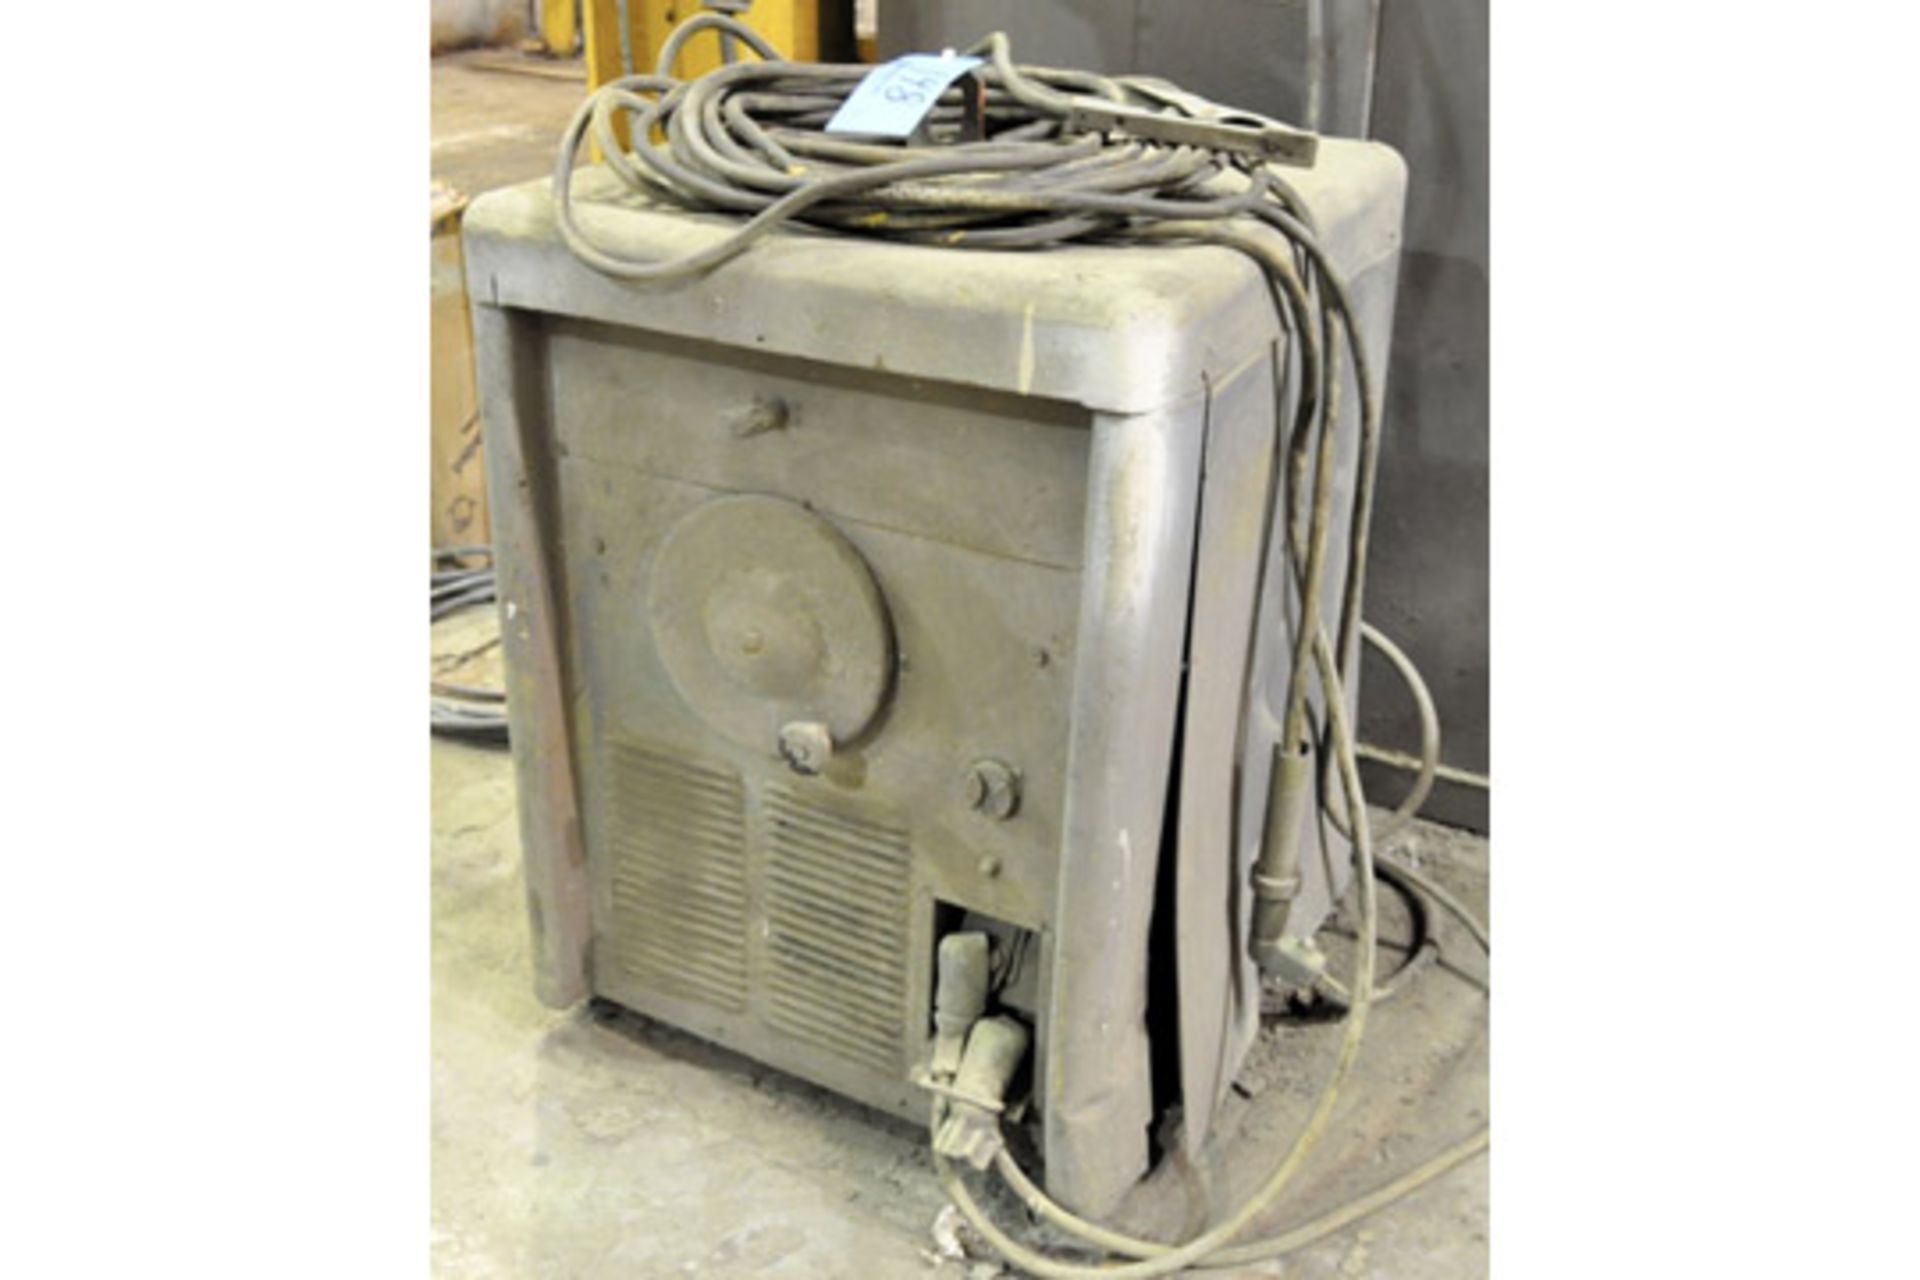 LINCOLN IDEALARC Approx. 300-Amp DC Arc Welding Power Source with Leads